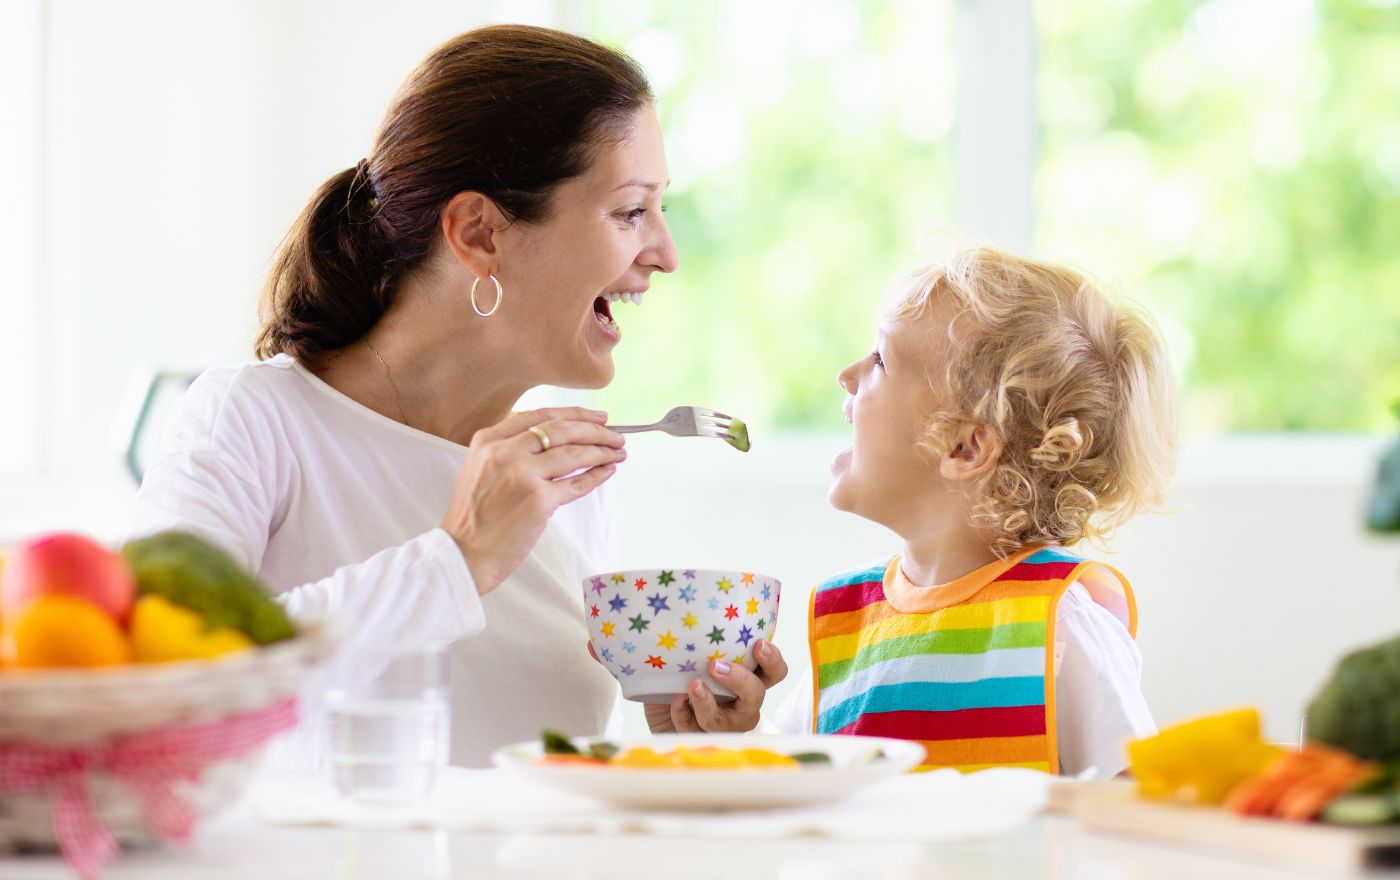 Feeding Therapy for Babies, Toddlers, and Children